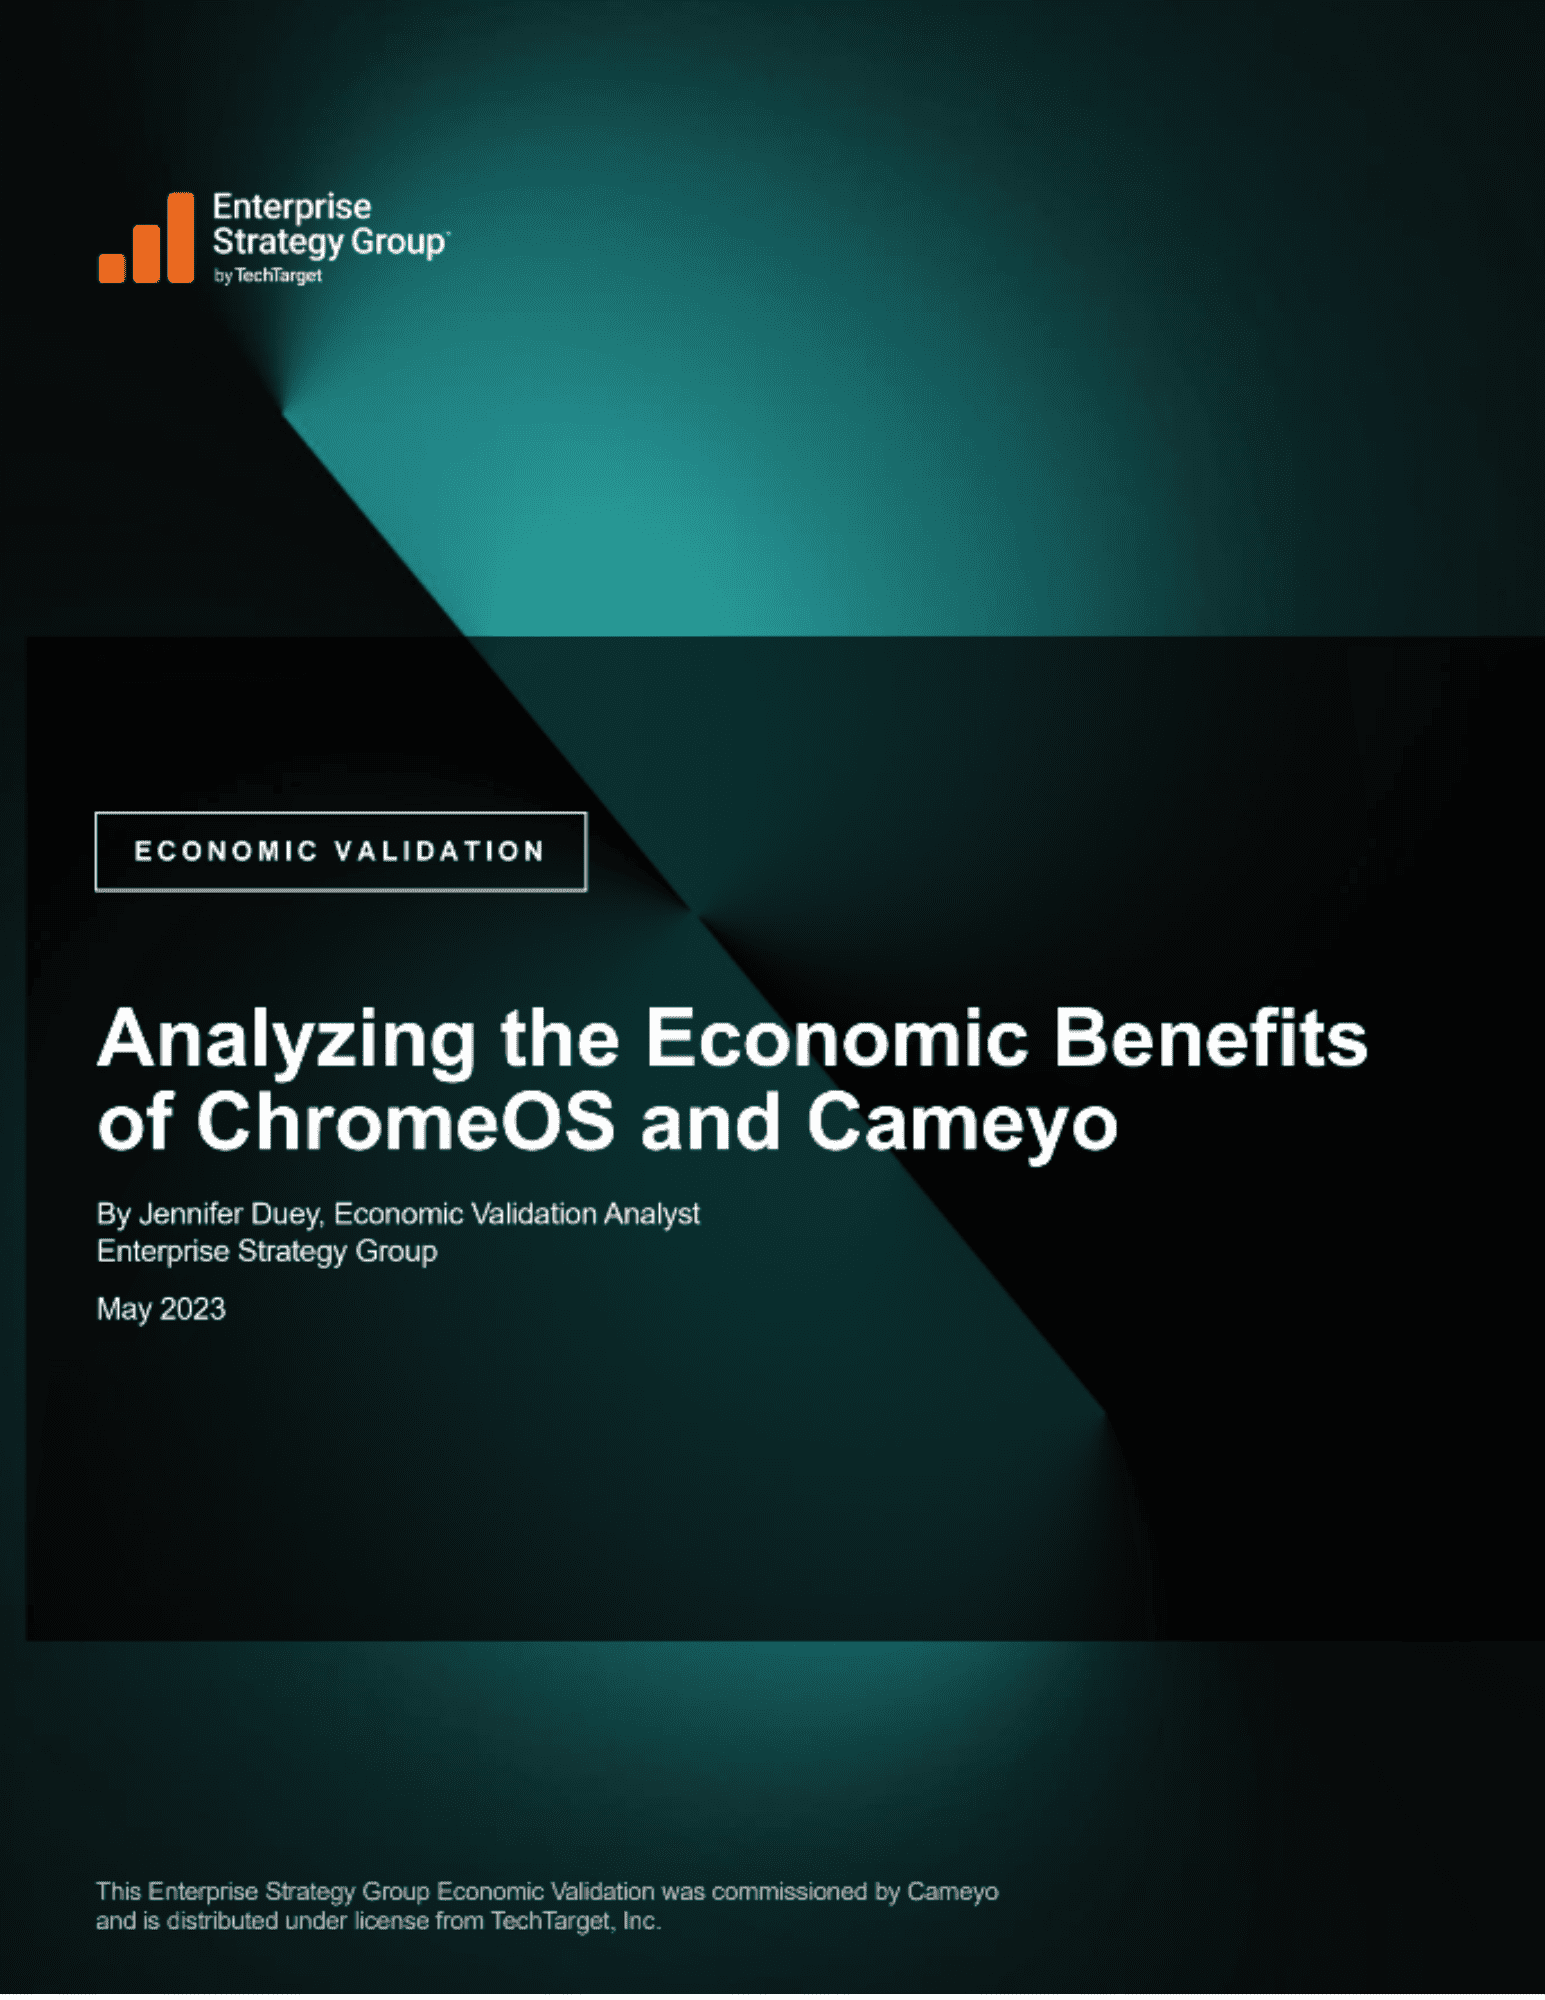 Cover of the ESG analyst report "Analyzing the Economic Benefits of ChromeOS and Cameyo"